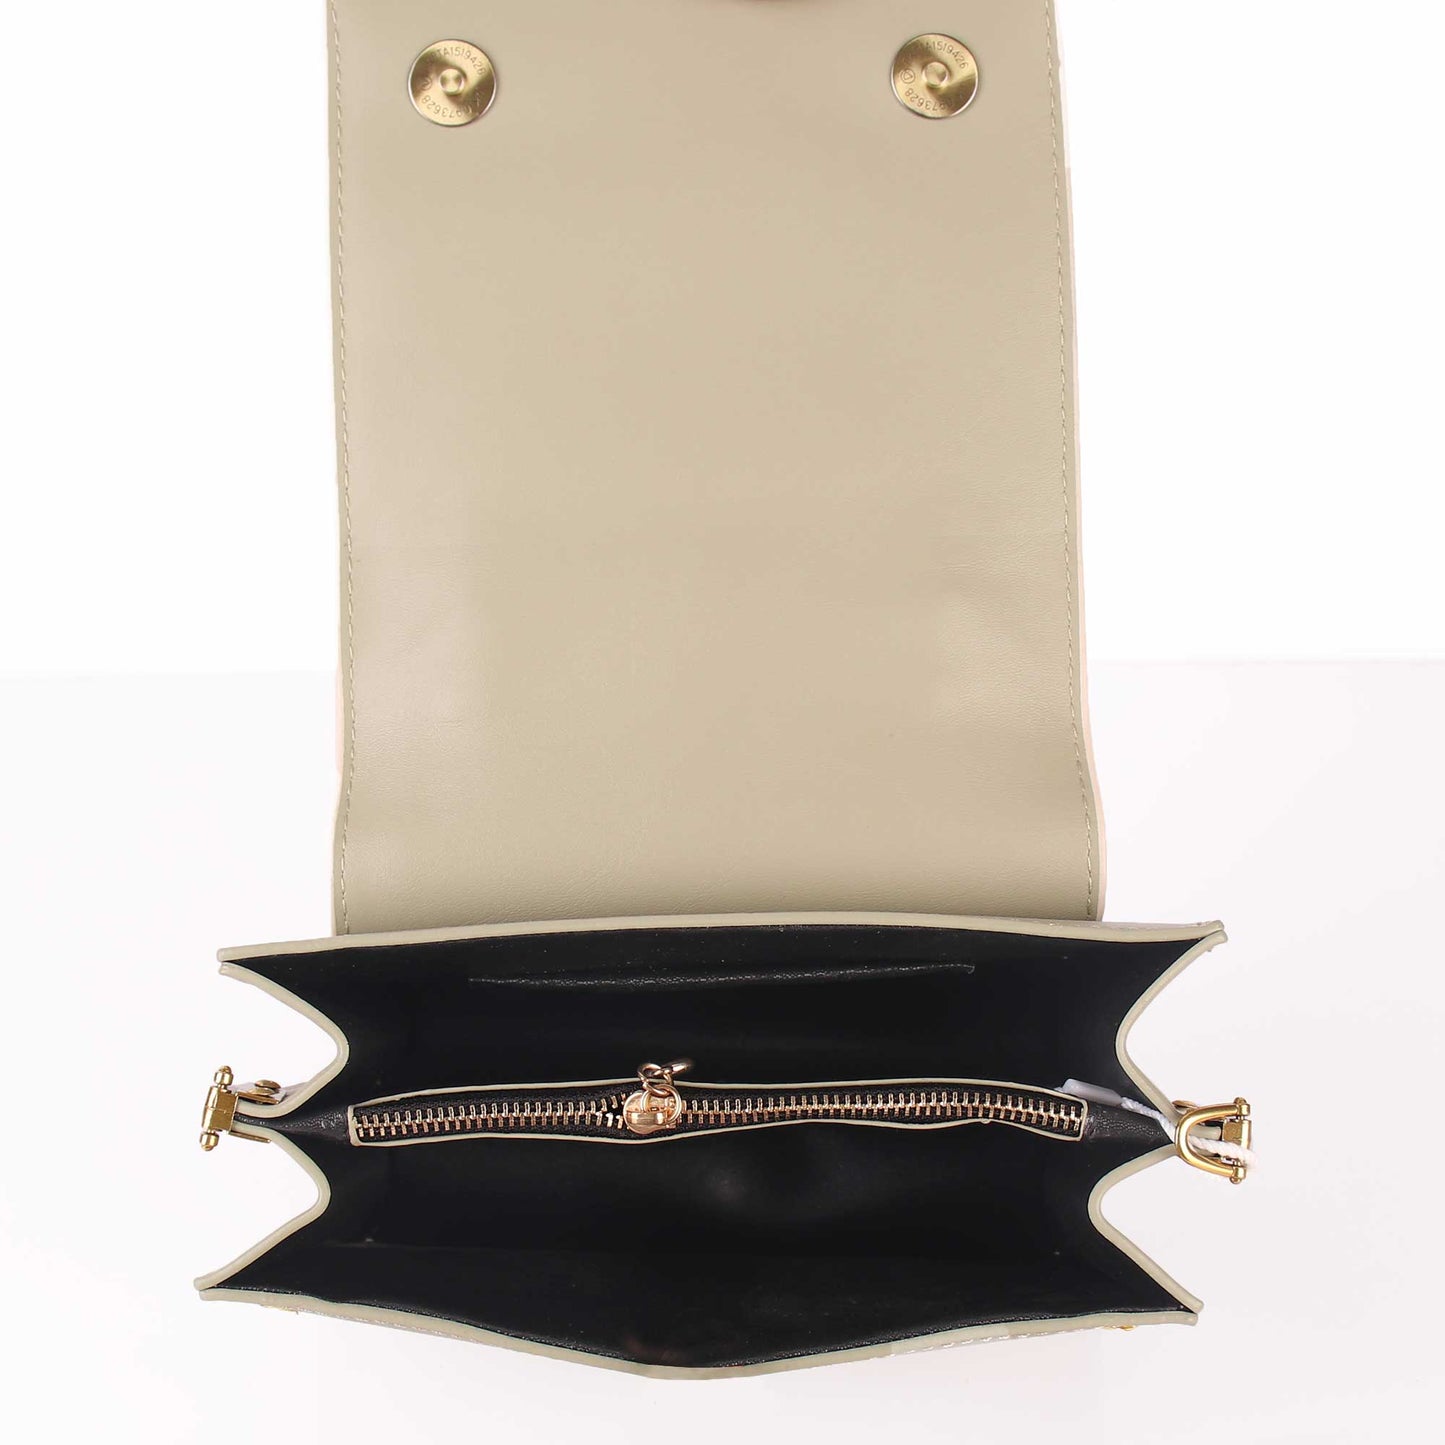 The Graceful Stitched Embroidery Sling Bag in Lighter Shade